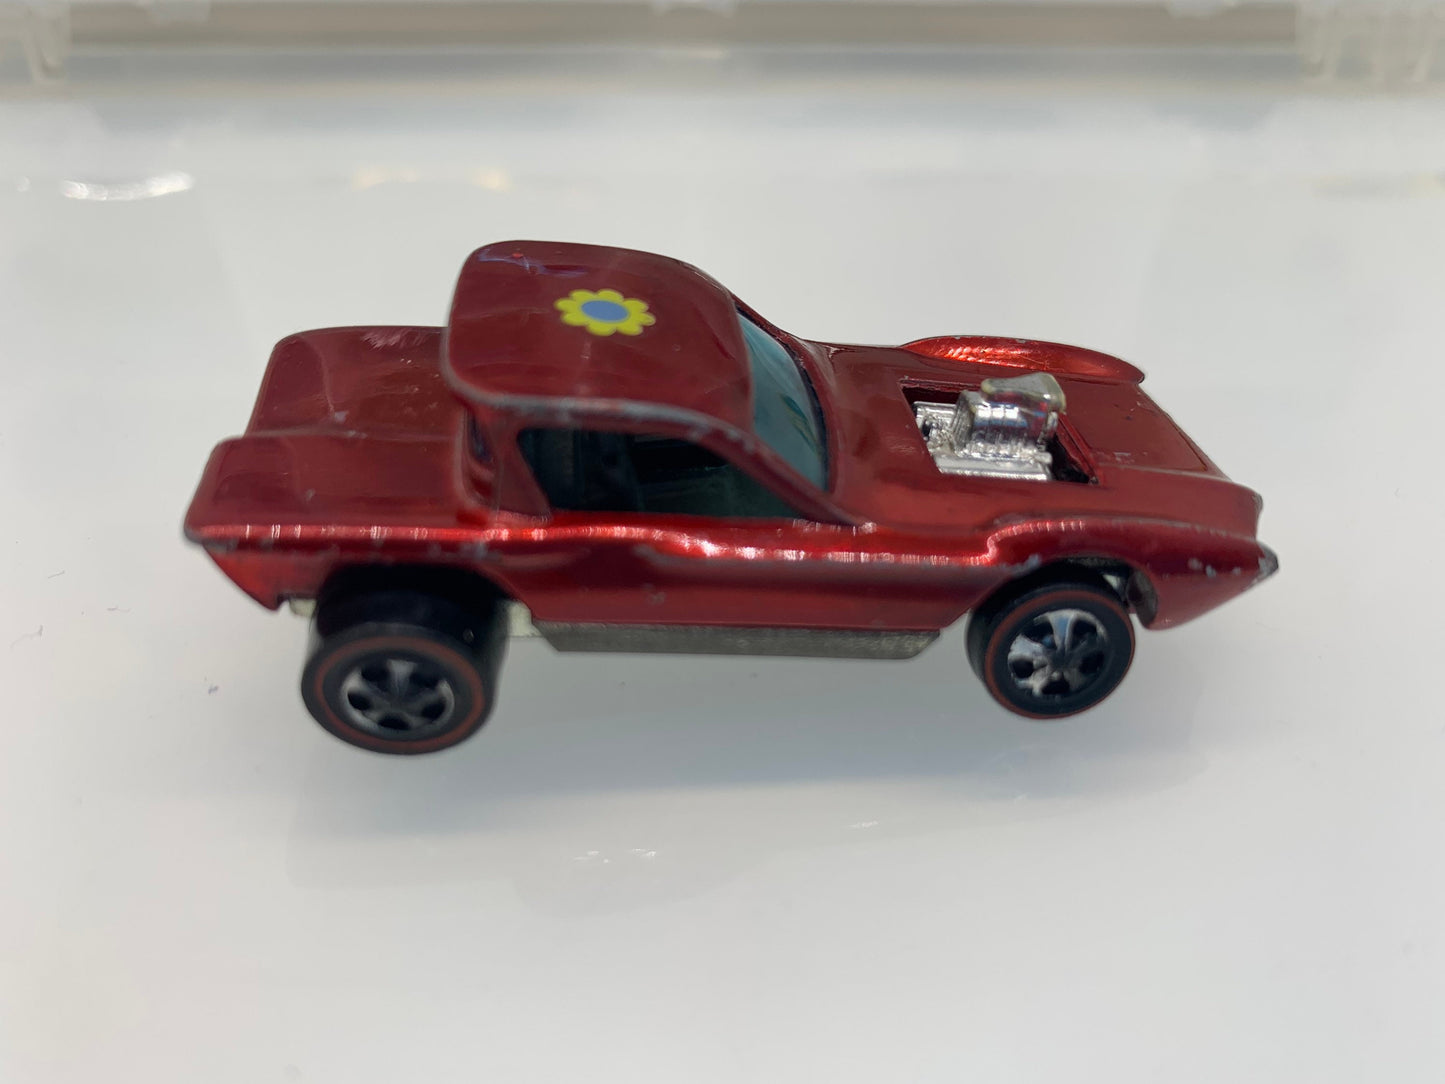 Hot Wheels Redline Python Red - Vintage Diecast Metal Cars - Vintage Collectibles - 1960's Toy Cars - Perfect Birthday Gift